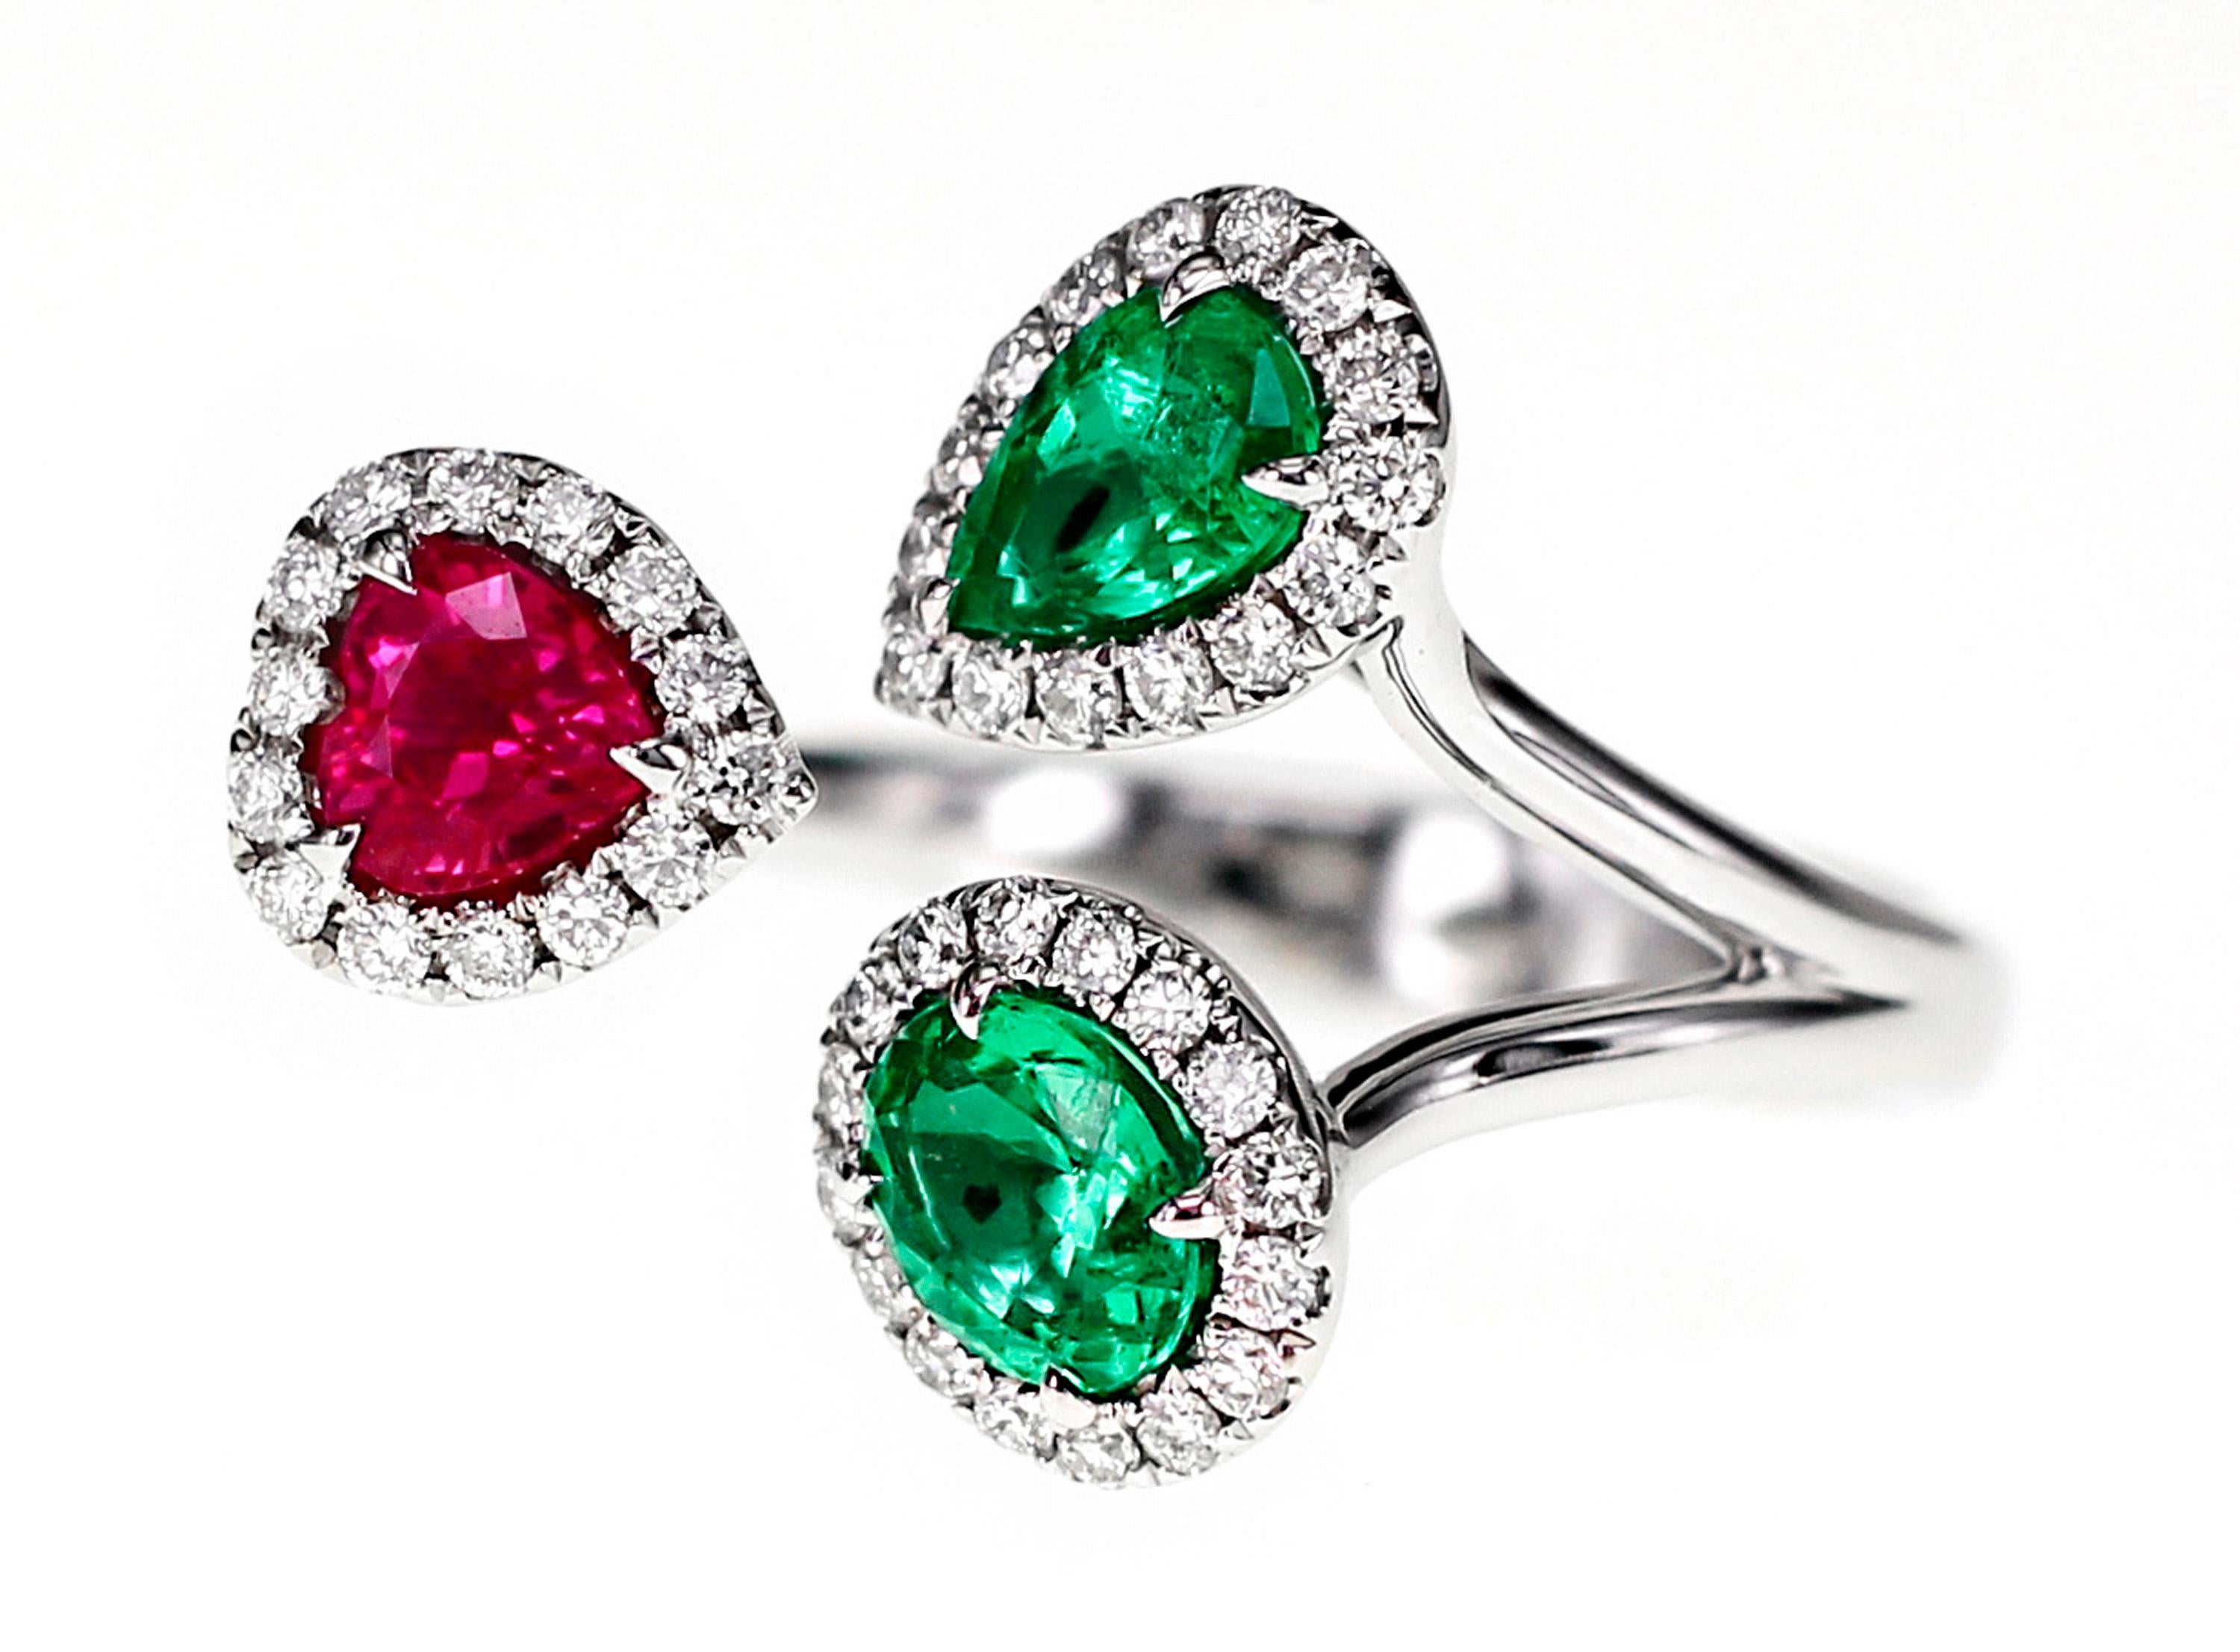 Showcasing from our Grandiosa Collection, a simple ring set with 0.82 carat of Zambian Emerald and 0.47 carat of Mozambique ruby is suitable for most hands. The ring is also set with 0.33 carat of white brilliant diamond. The diamond quality is F